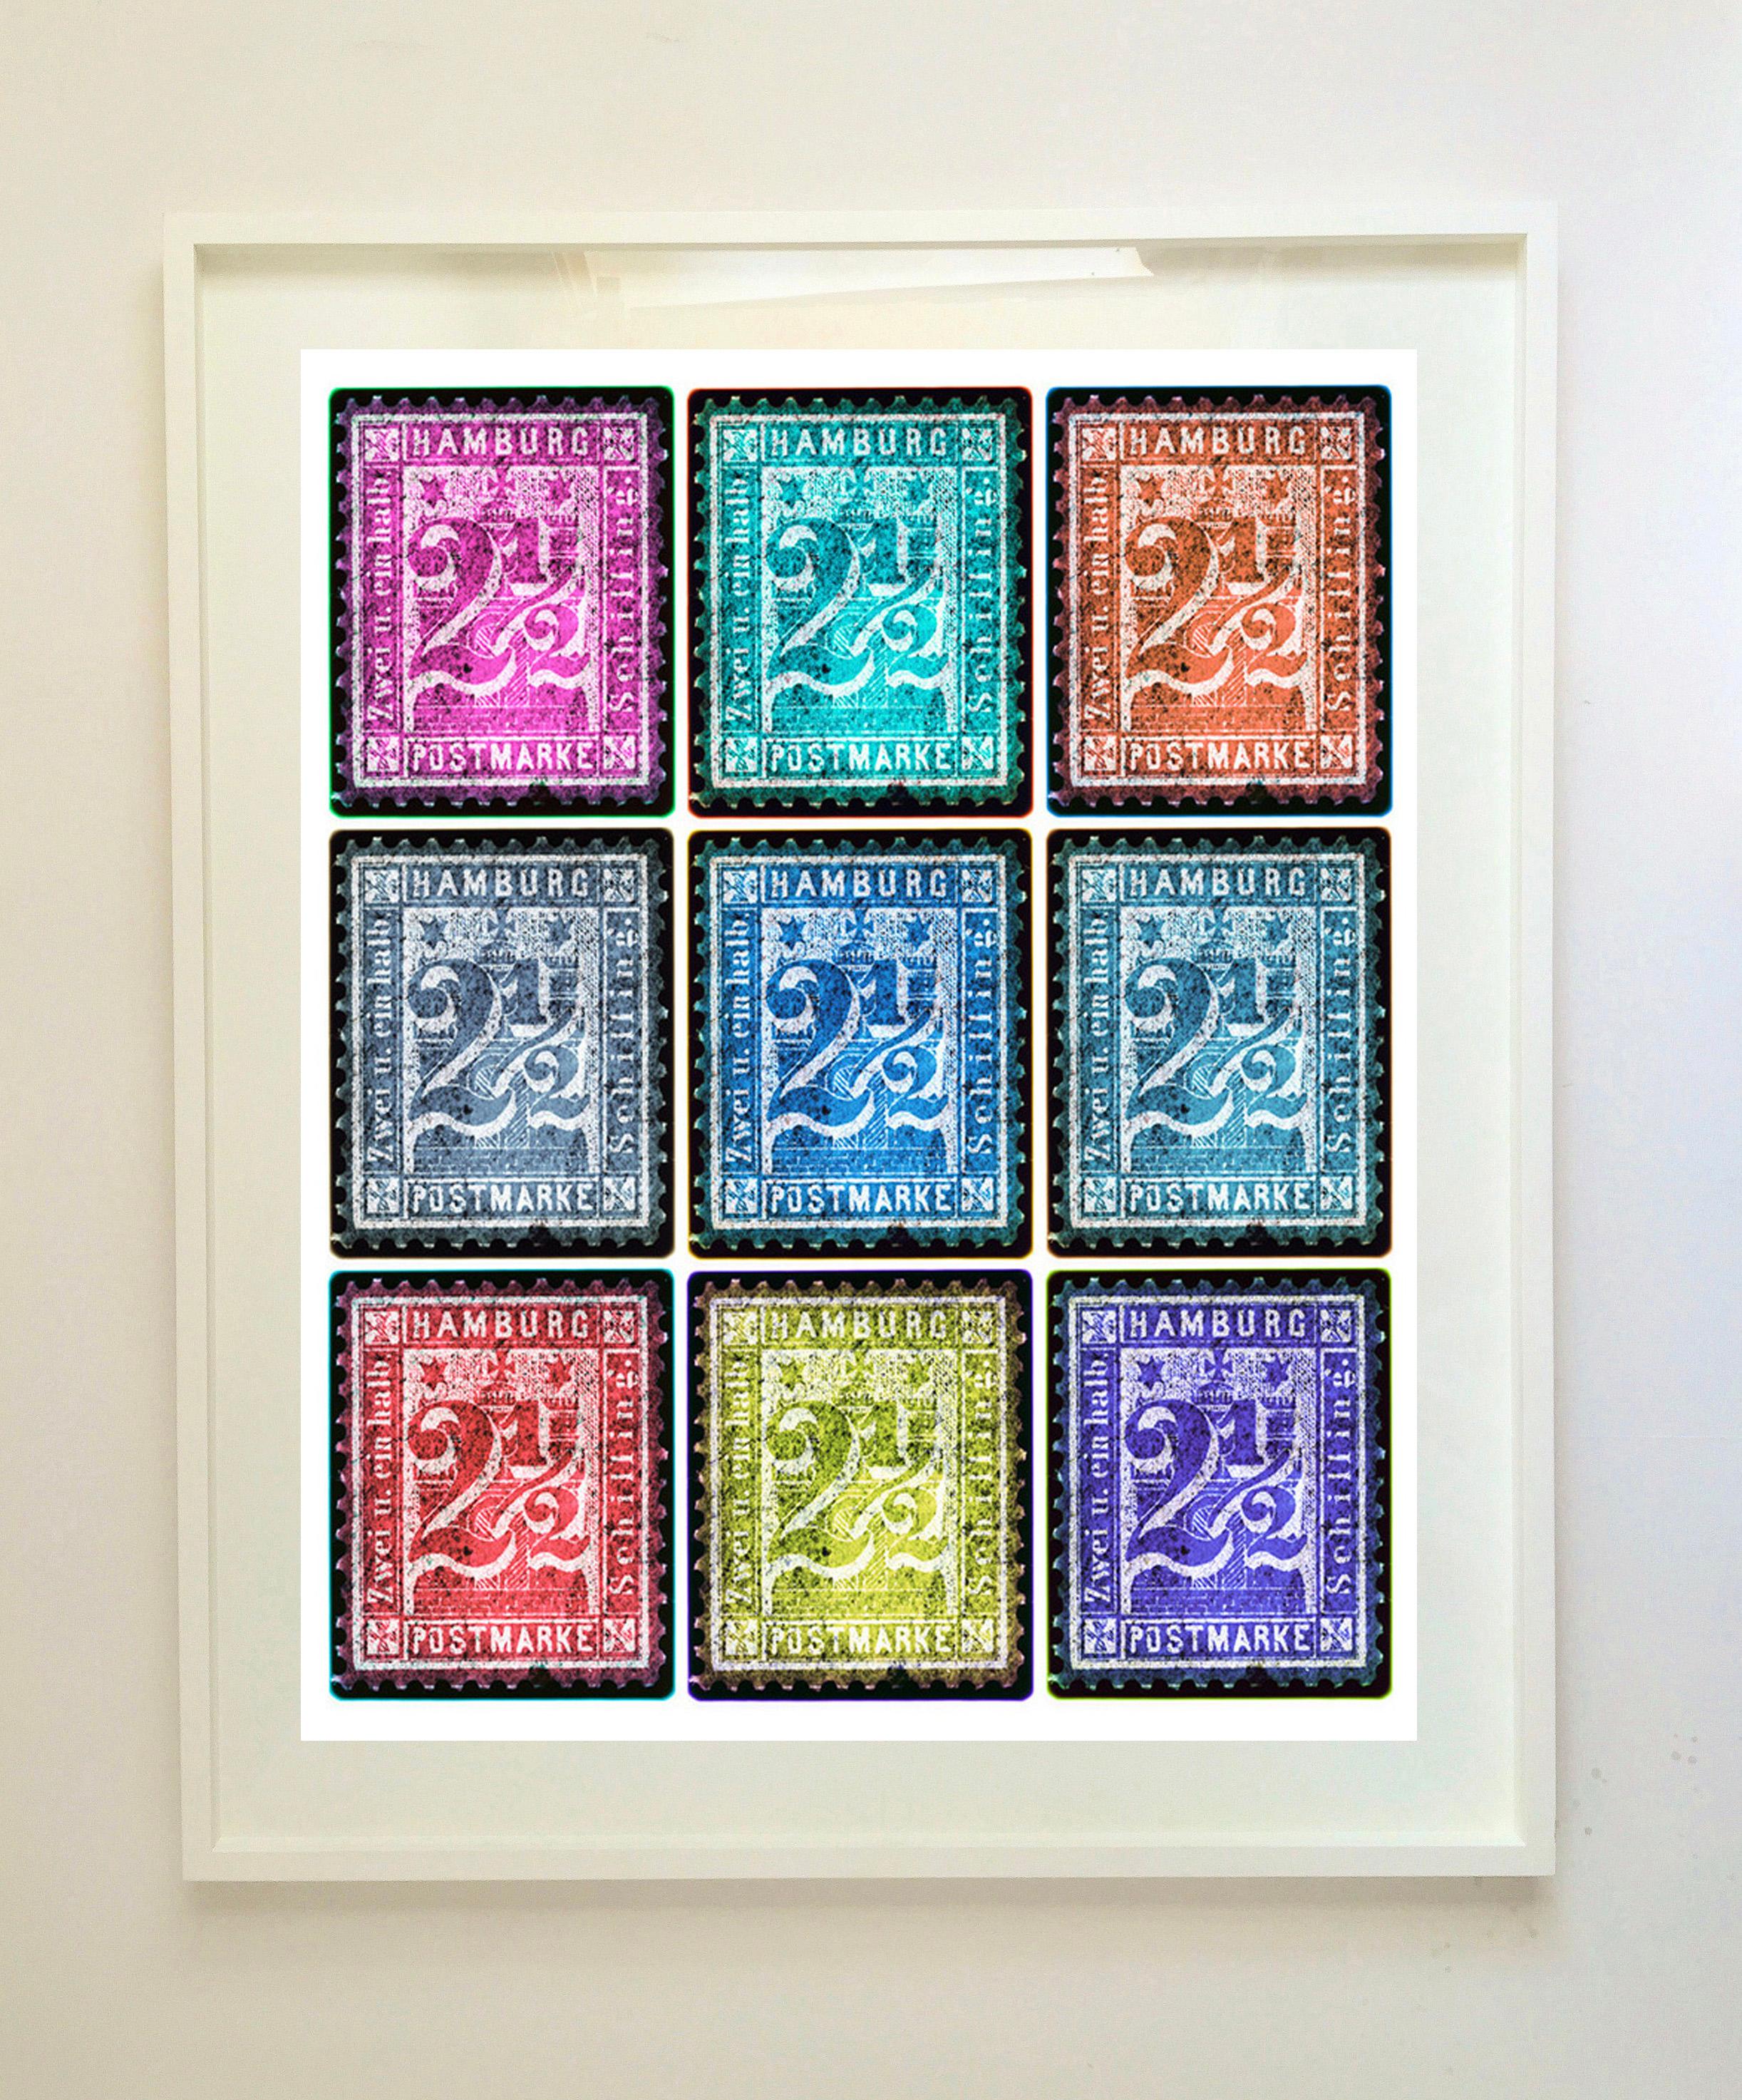 Stamp Collection, 1864 Hamburg (Multi-Color Mosaic German Stamps) - Color Photo - Pop Art Photograph by Heidler & Heeps